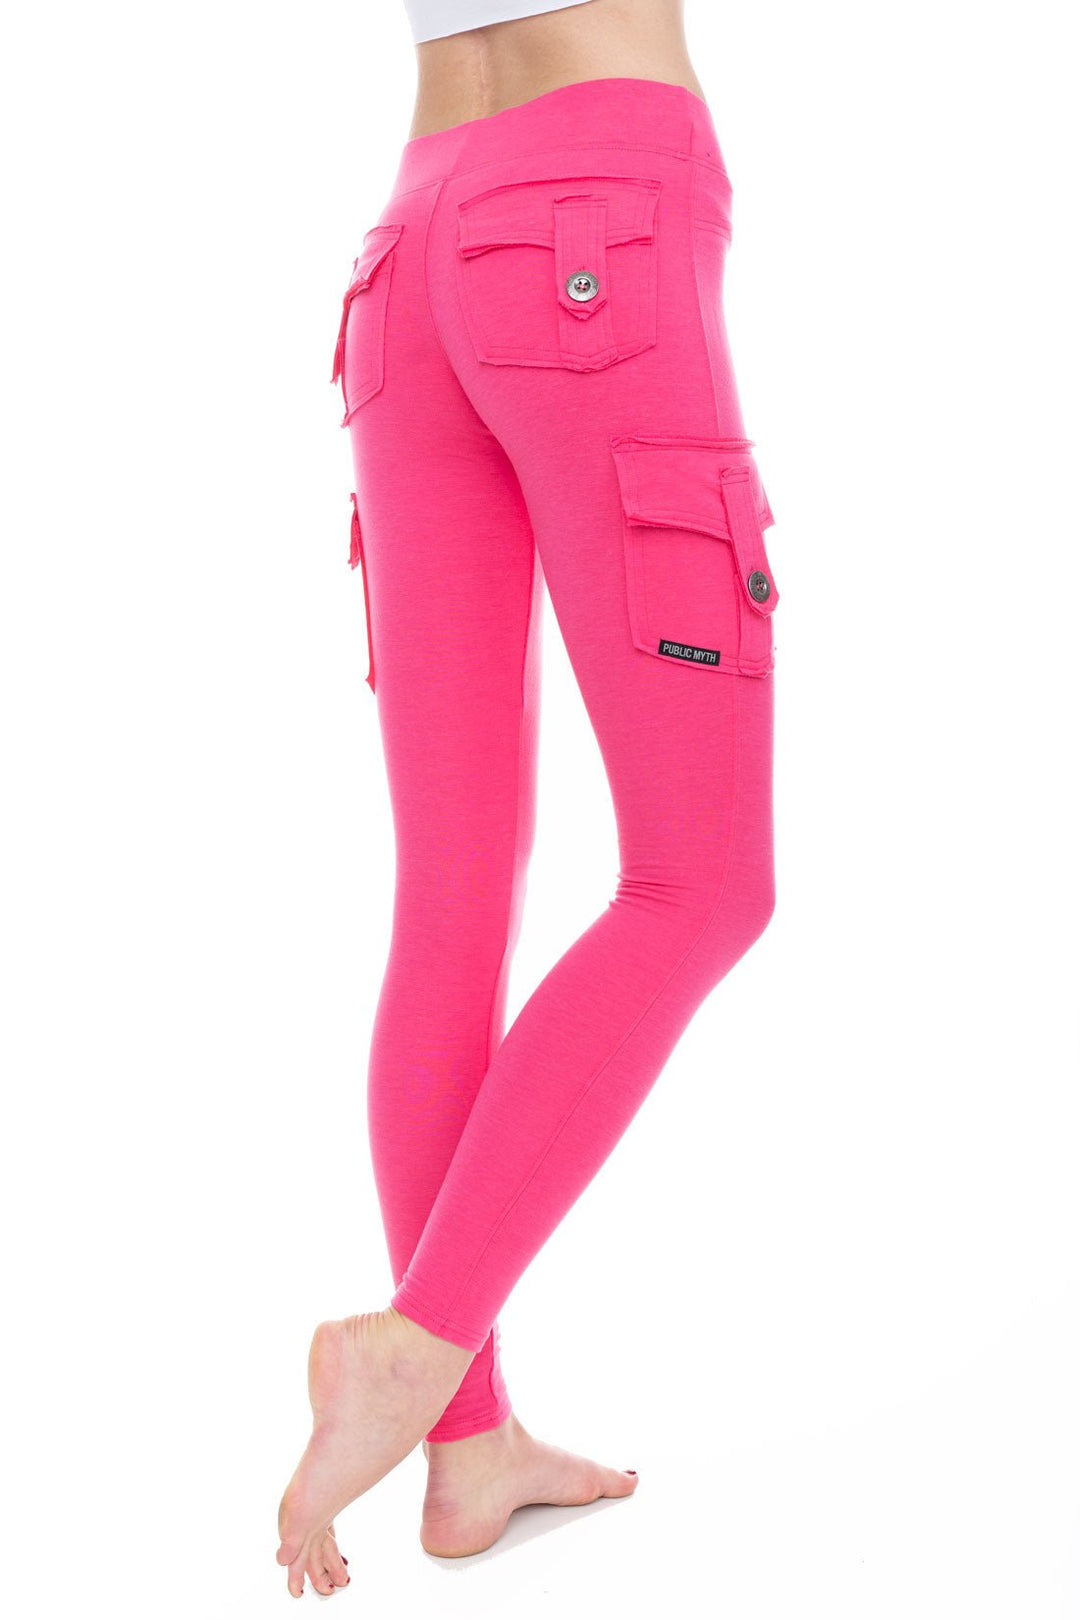 Chickfly Bamboo Leggings High Rise or Low Rise